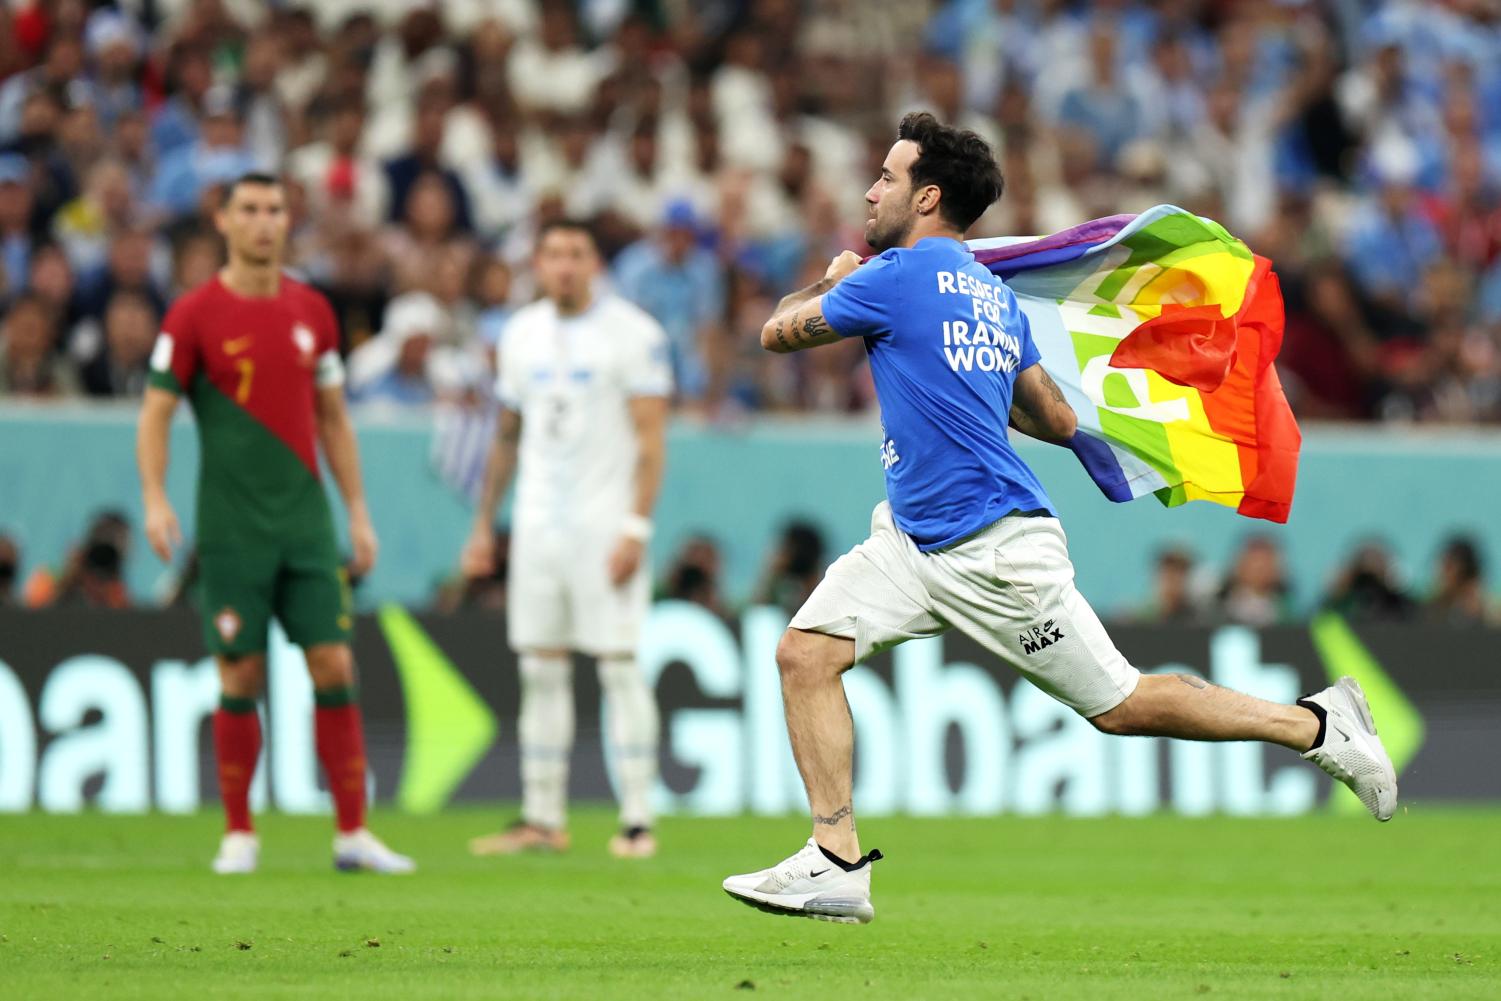 The Mustang The World Cup Pitch Invader